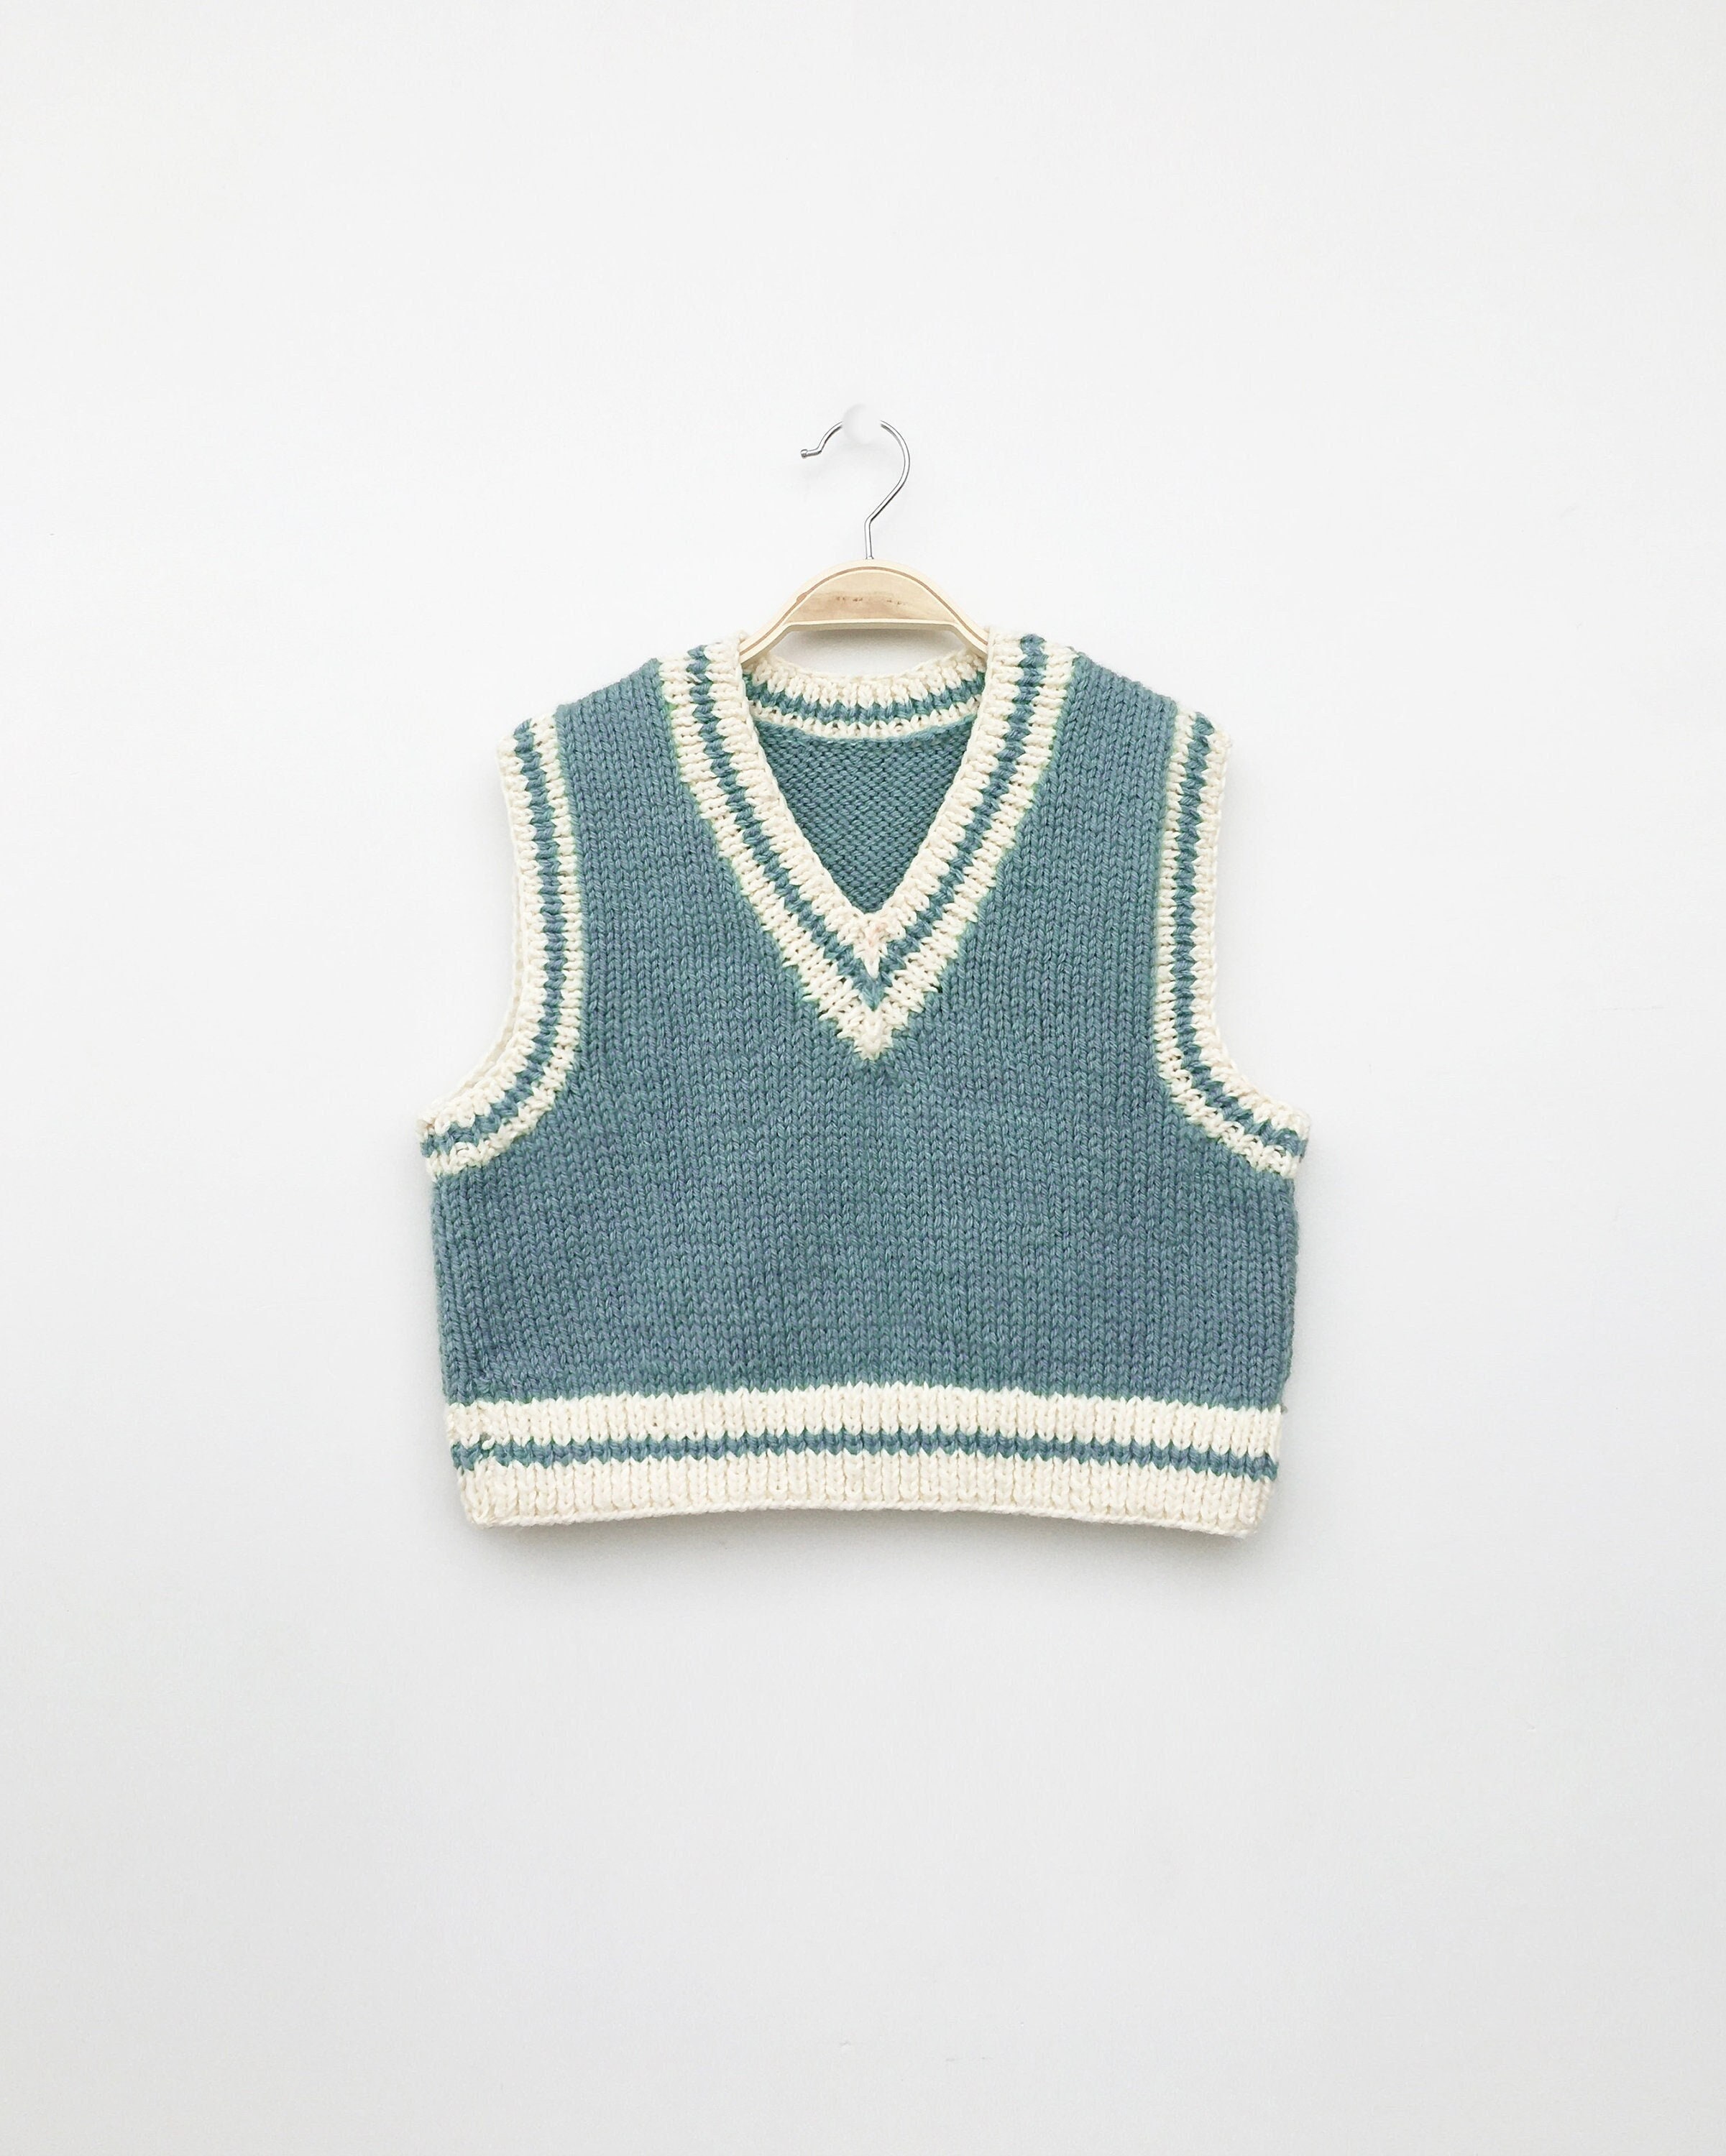  LABISHU Toddler Kids Boys V Neck Sweater Sleeveless Knit Vest  Graphic Tank Tops Pullover Knitwear School Uniform Green Grey: Clothing,  Shoes & Jewelry